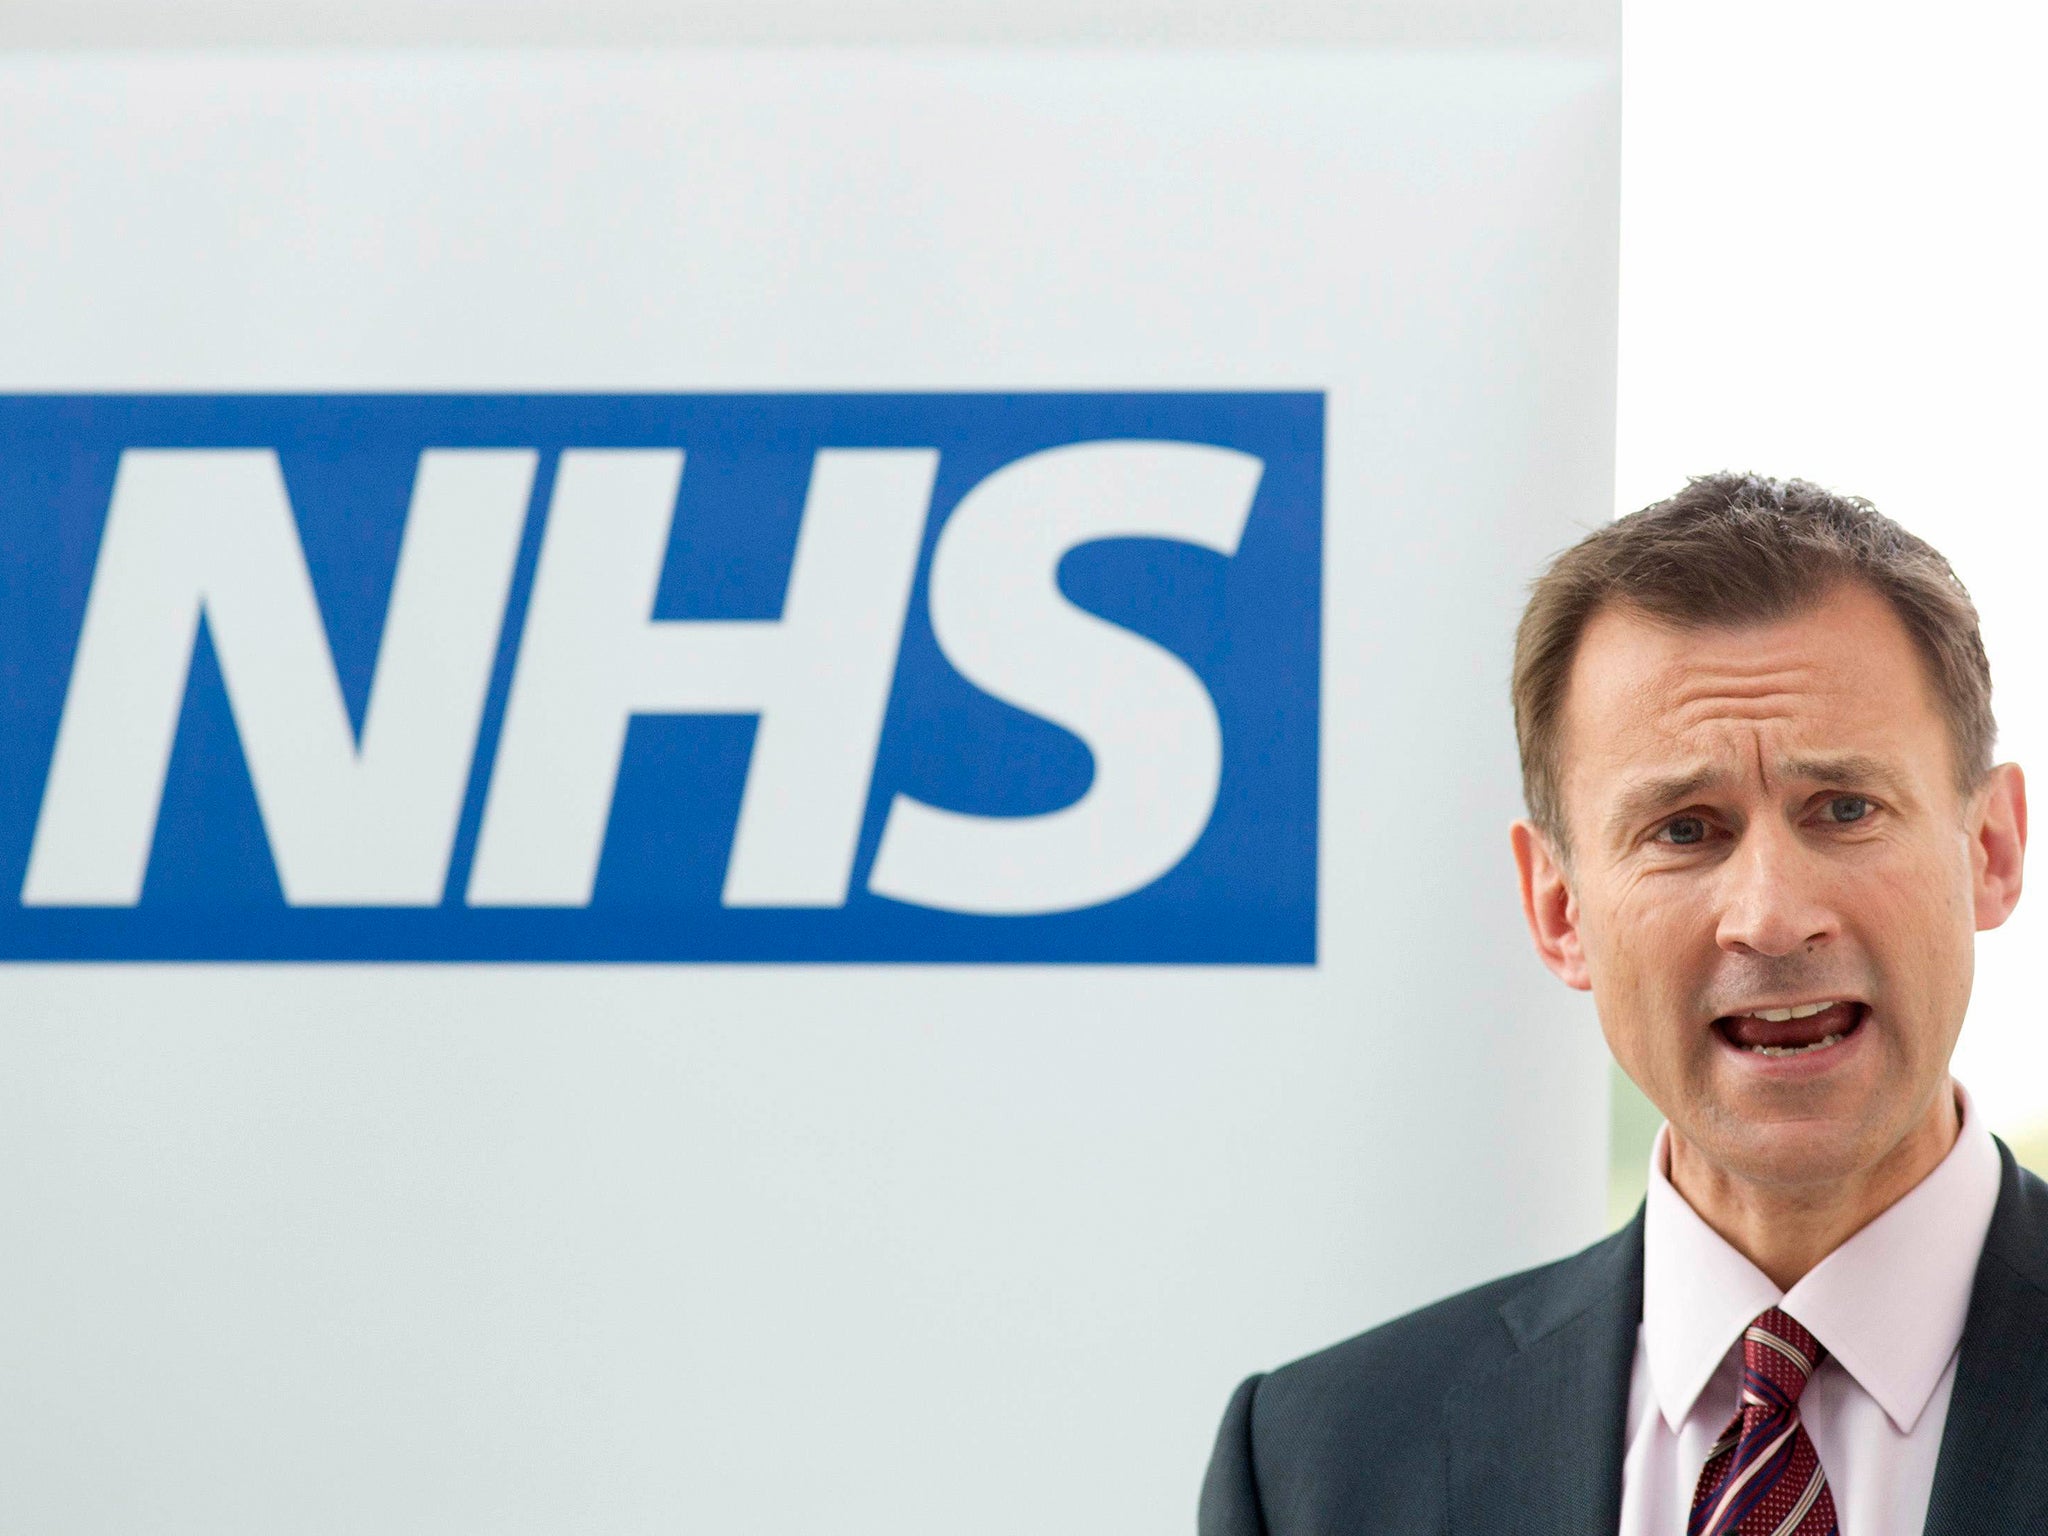 Jeremy Hunt, the Health Secretary, has been criticised by doctors